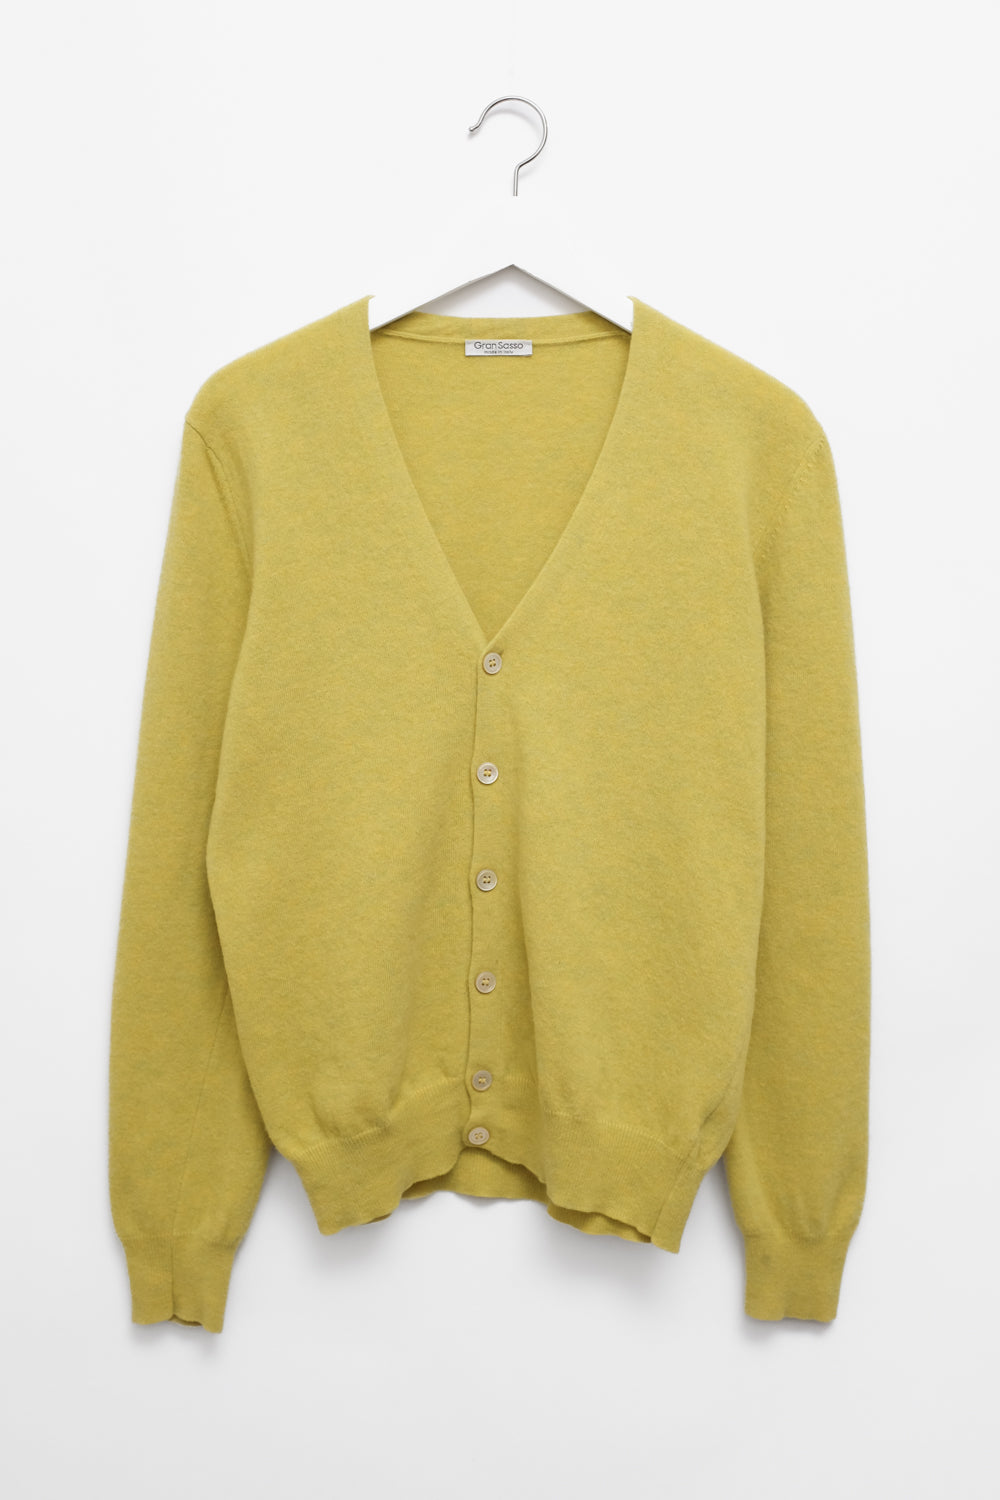 PURE CASHMERE LIME CARDIGAN SWEATER